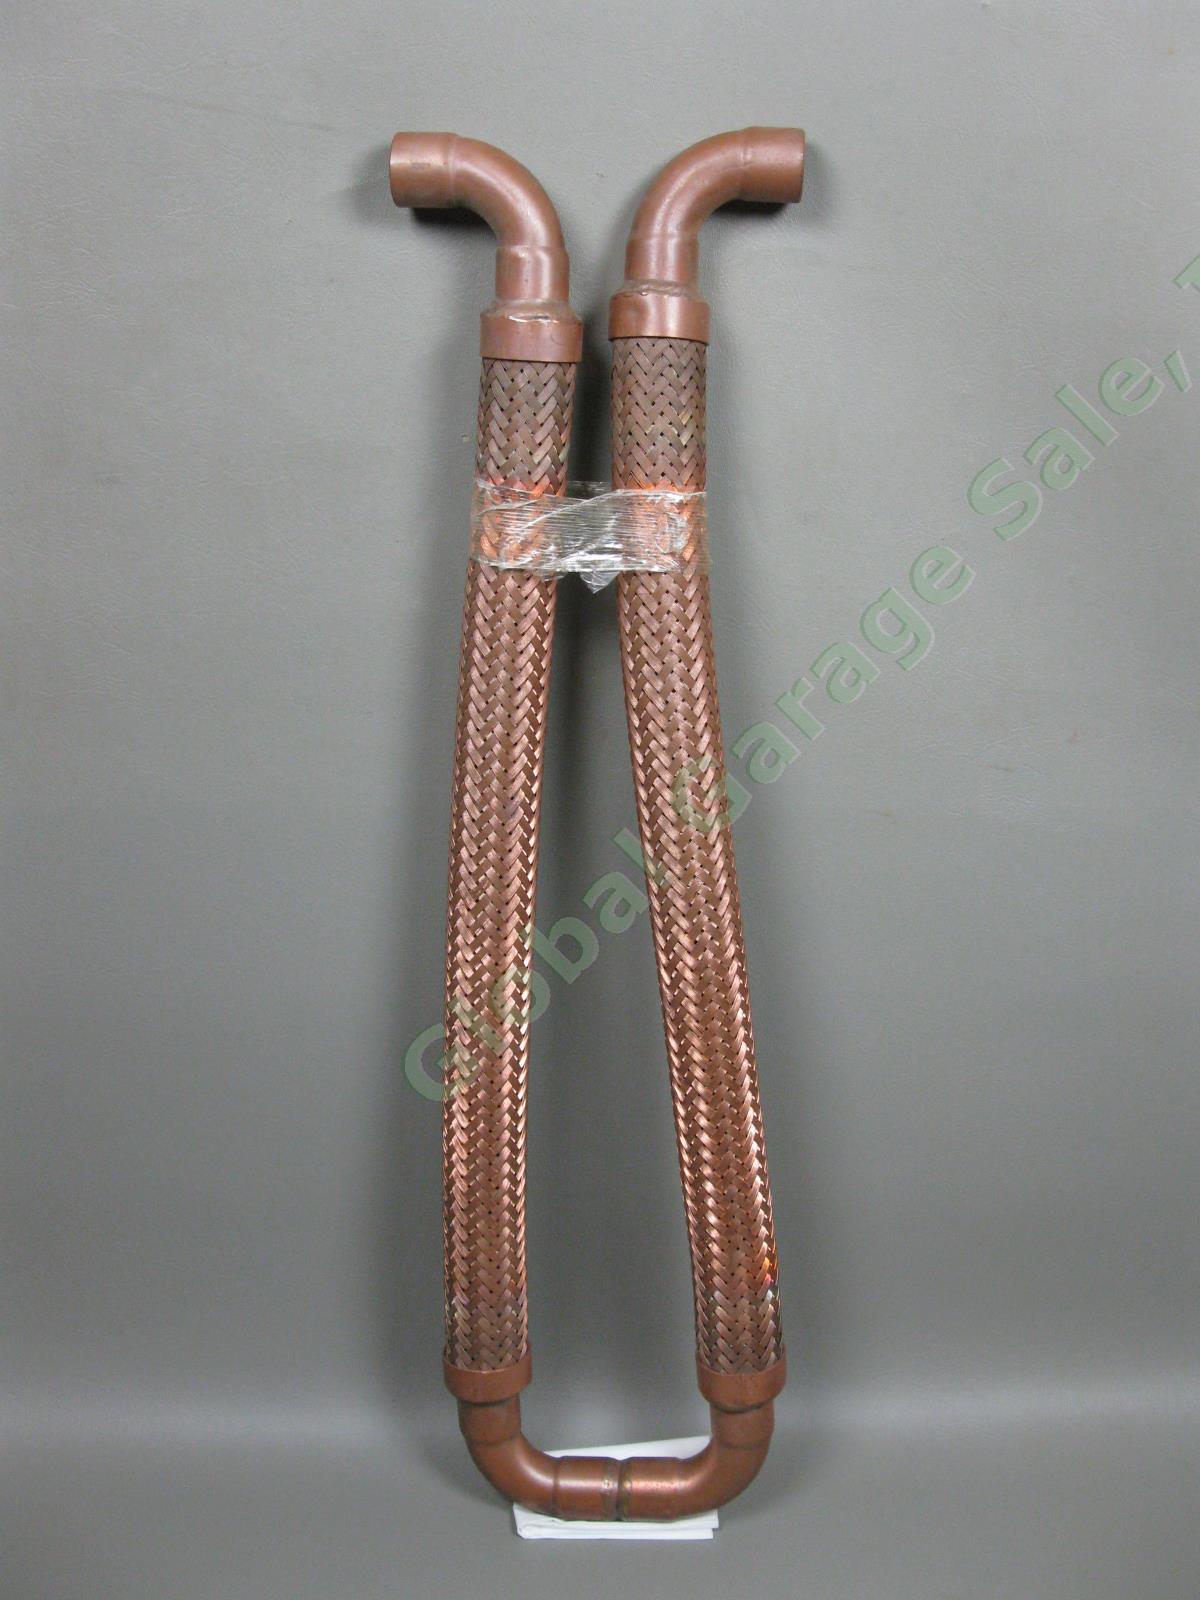 1" Female Sweat Copper Bronze Expansion Loop Joint Flex Thermal Seismic Pipe